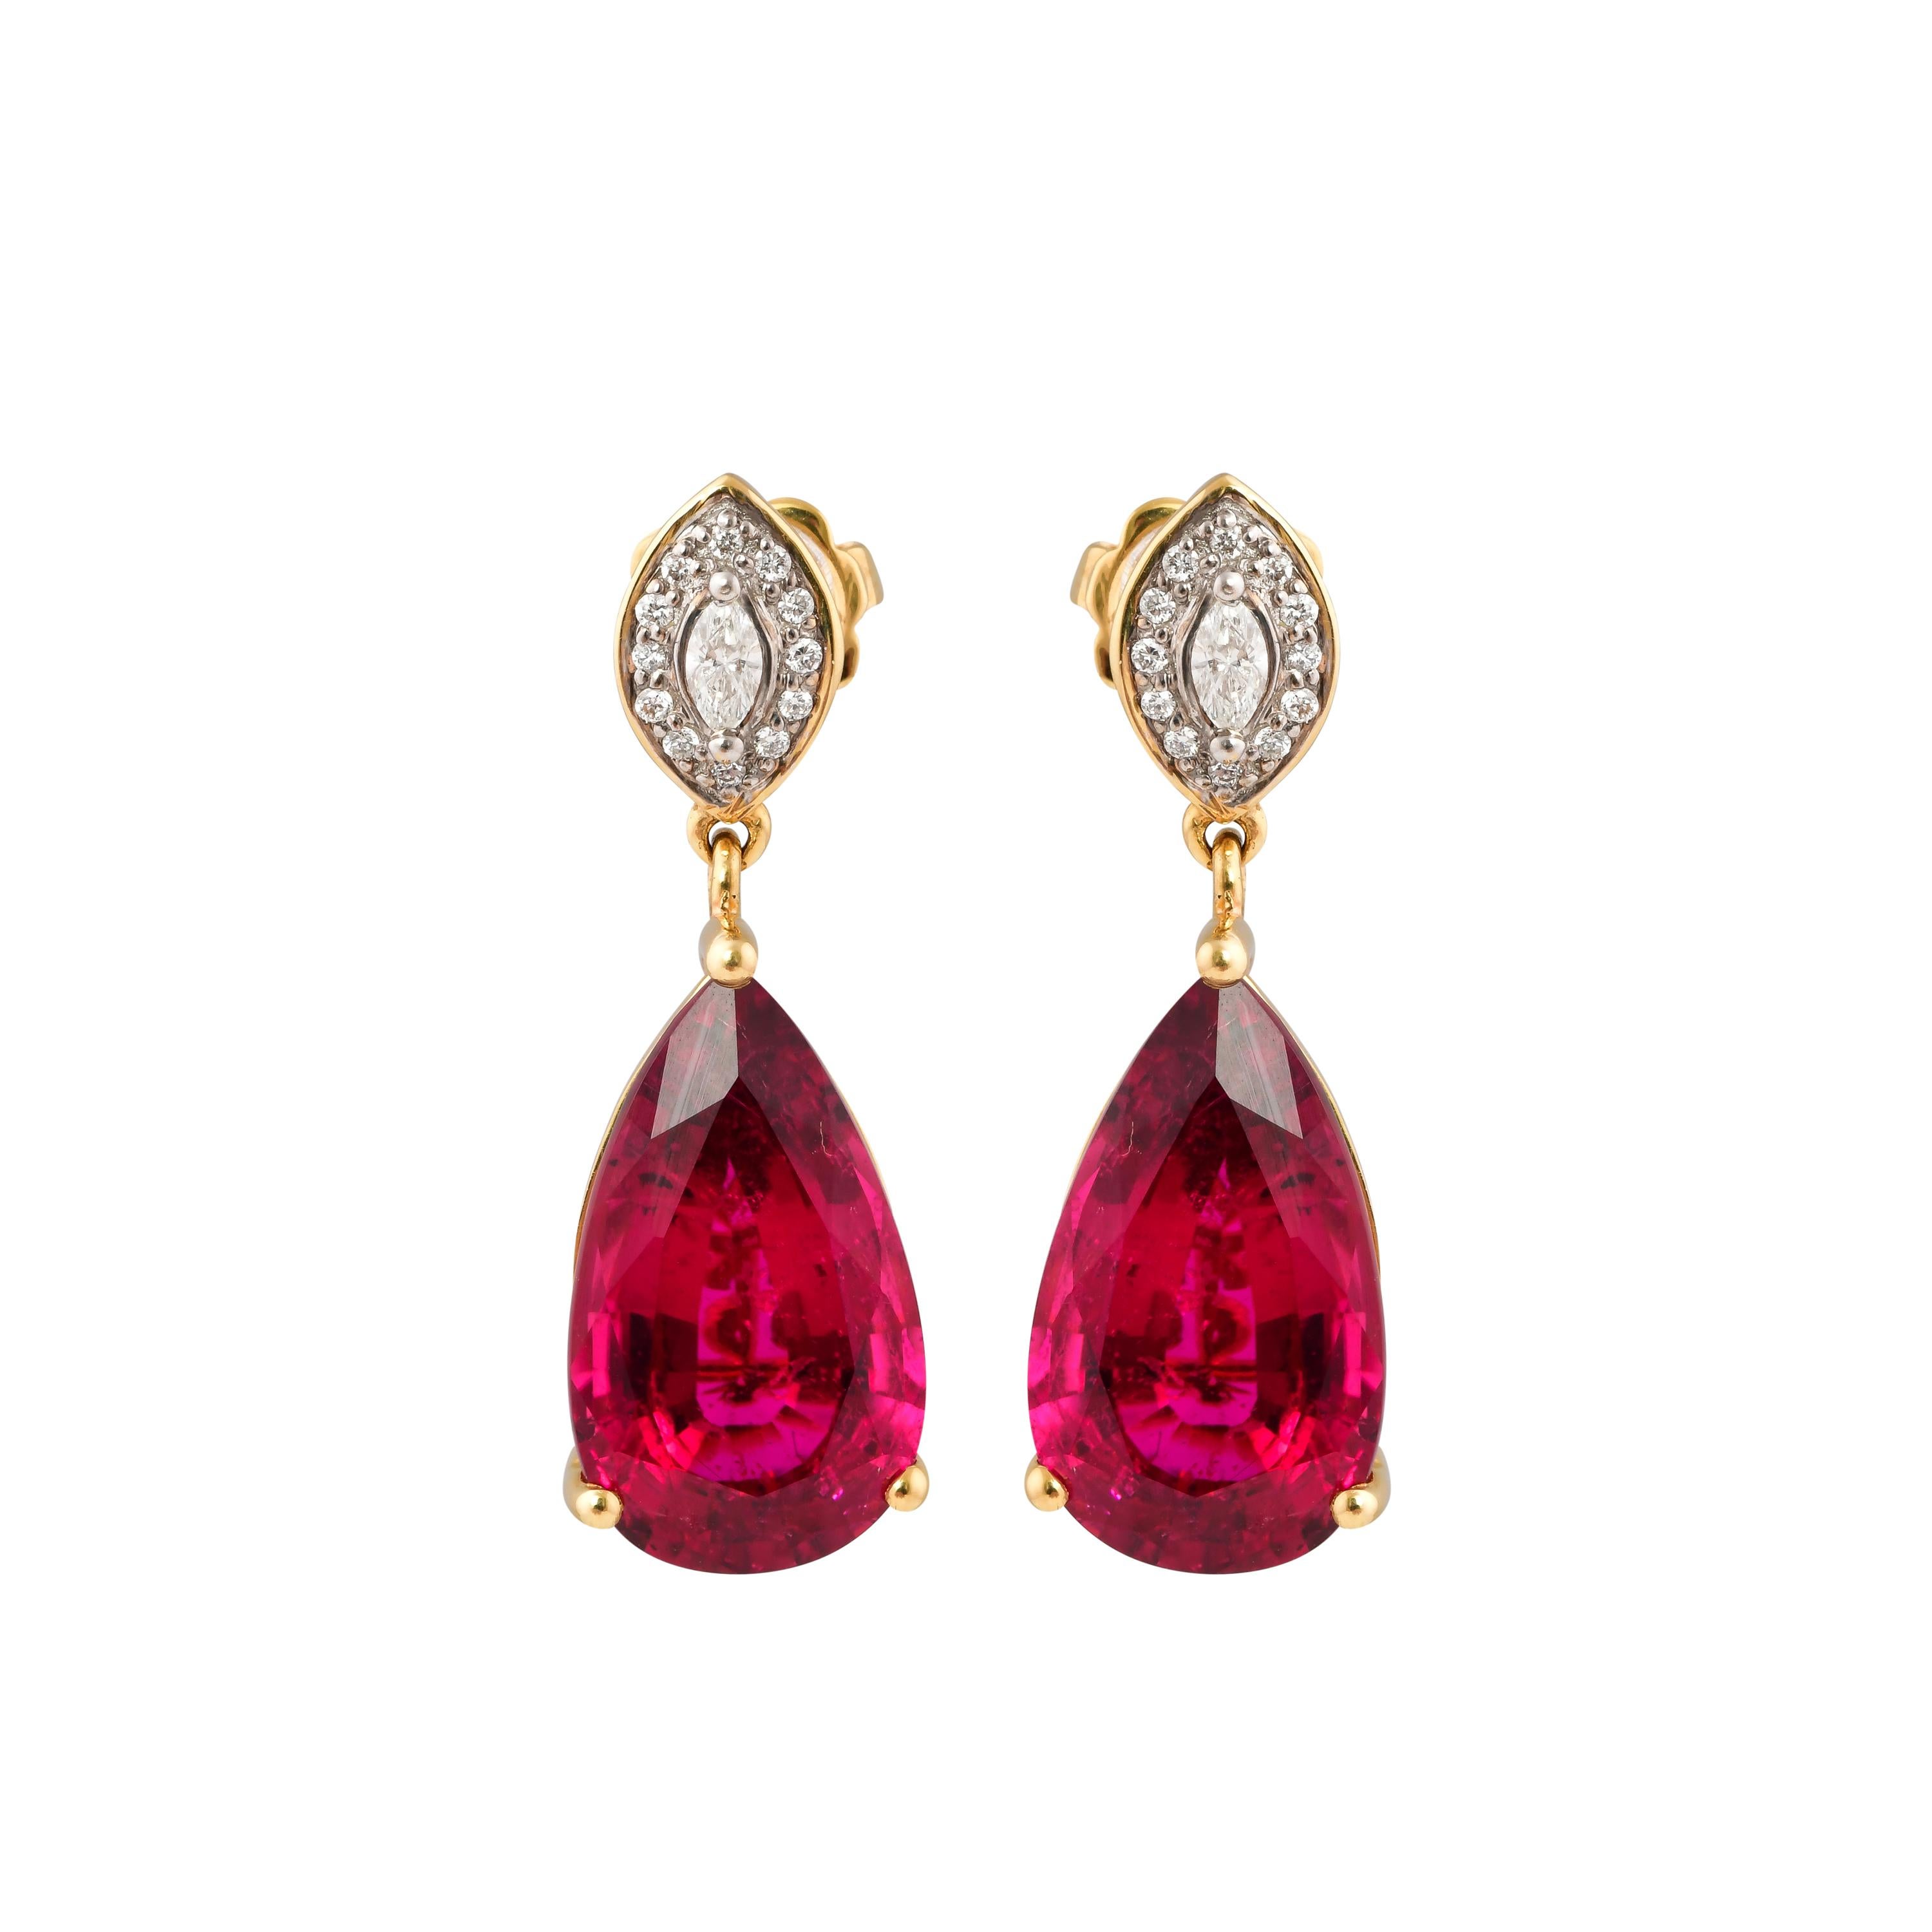 This collection features the most radiant Rubellite tourmalines. These gemstones show a magnificent and regal deep red colour, and the yellow gold and diamond accents makes these pieces a true showstopper. 

Classic Rubellite tourmaline earring in